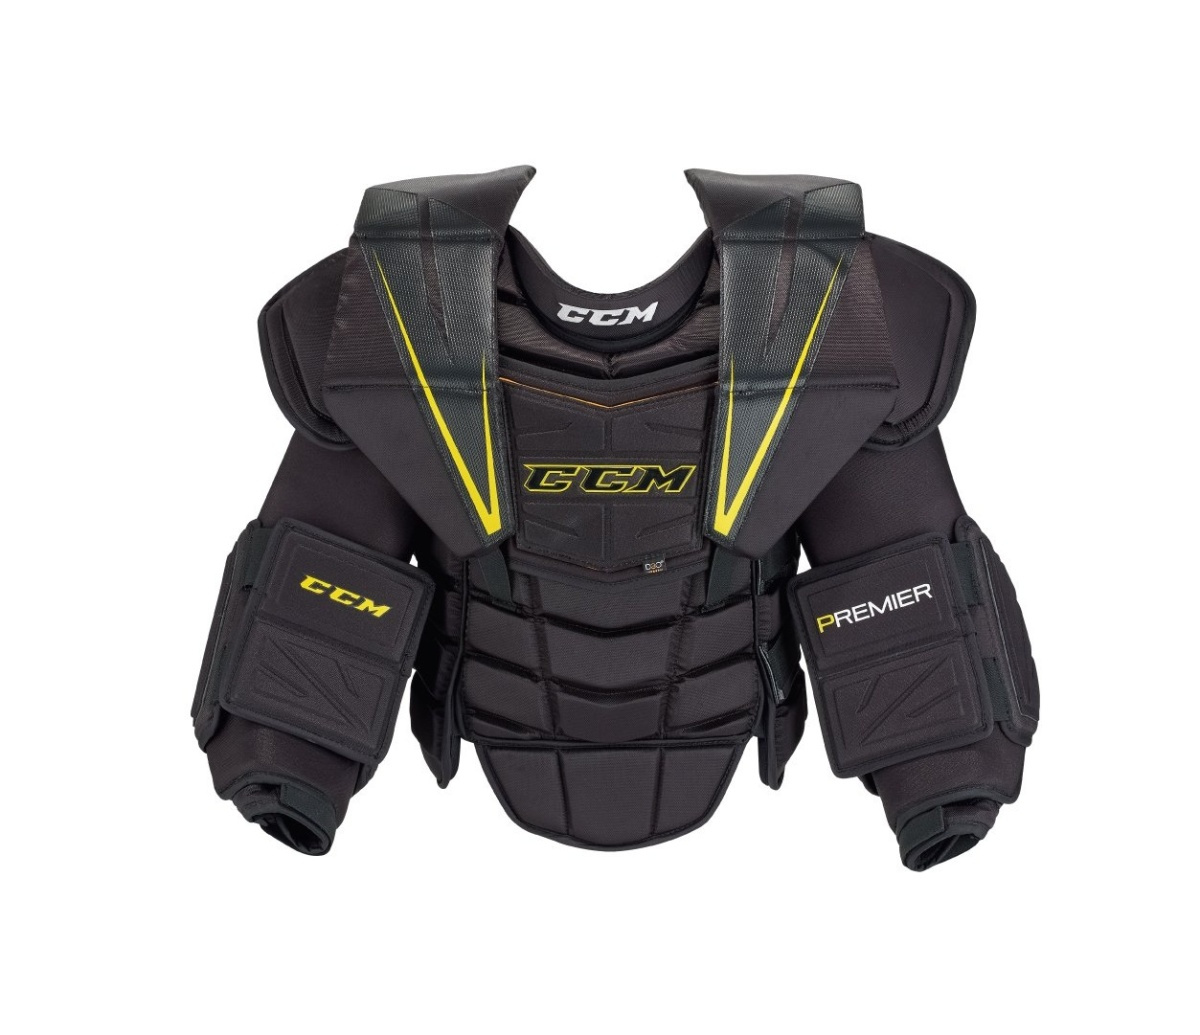 Ccm Premier Chest Protector Sizing Chart